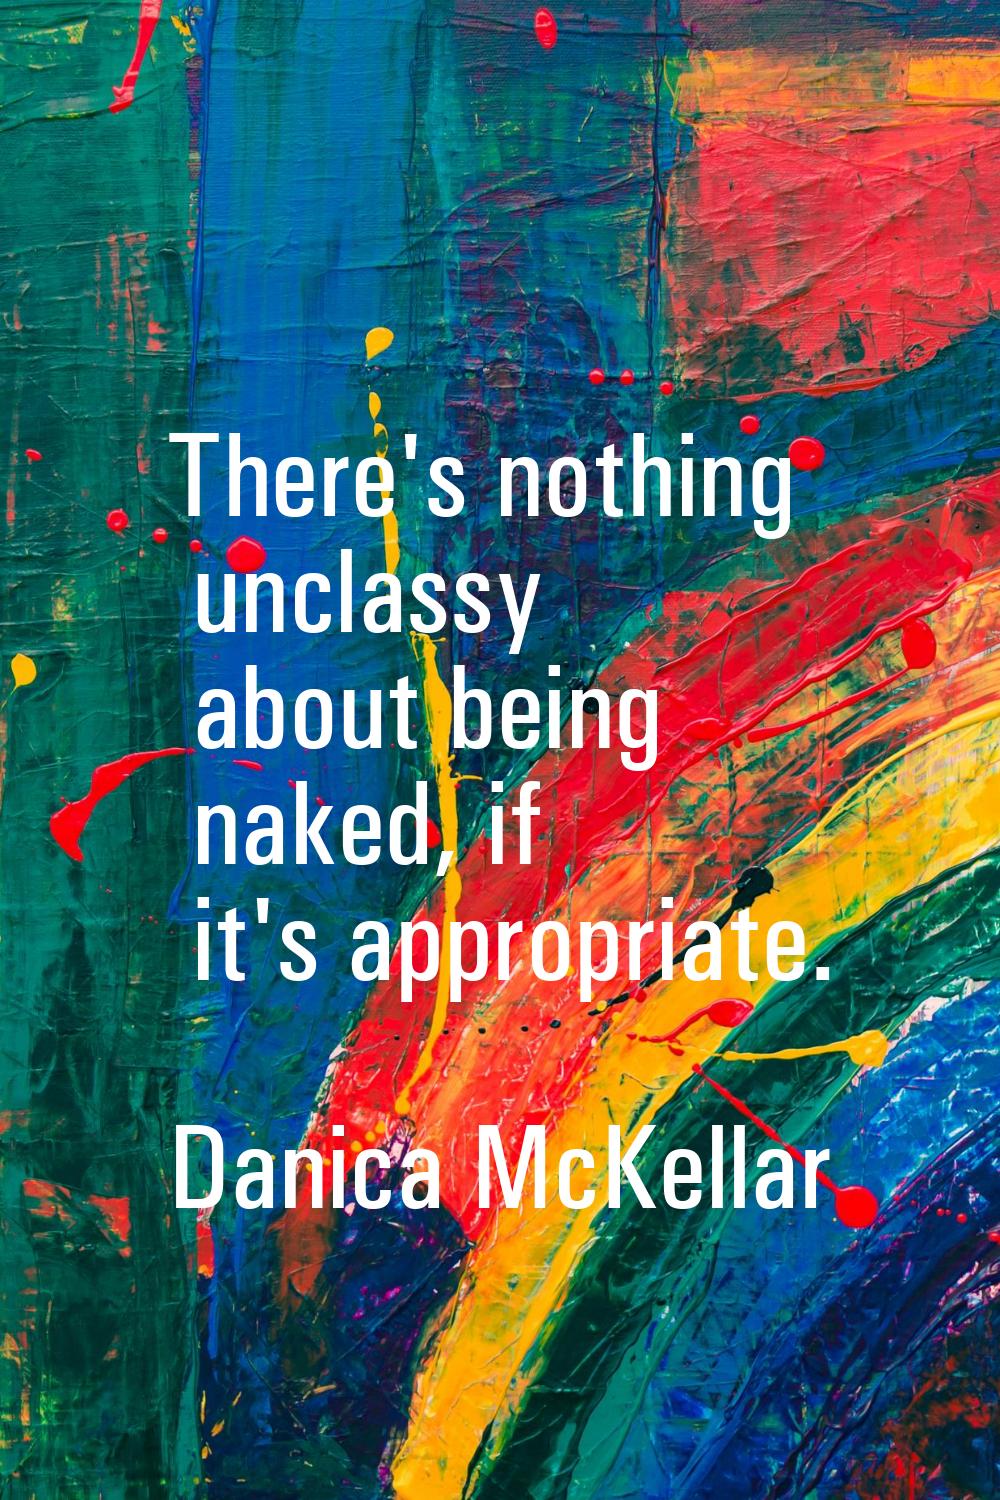 There's nothing unclassy about being naked, if it's appropriate.